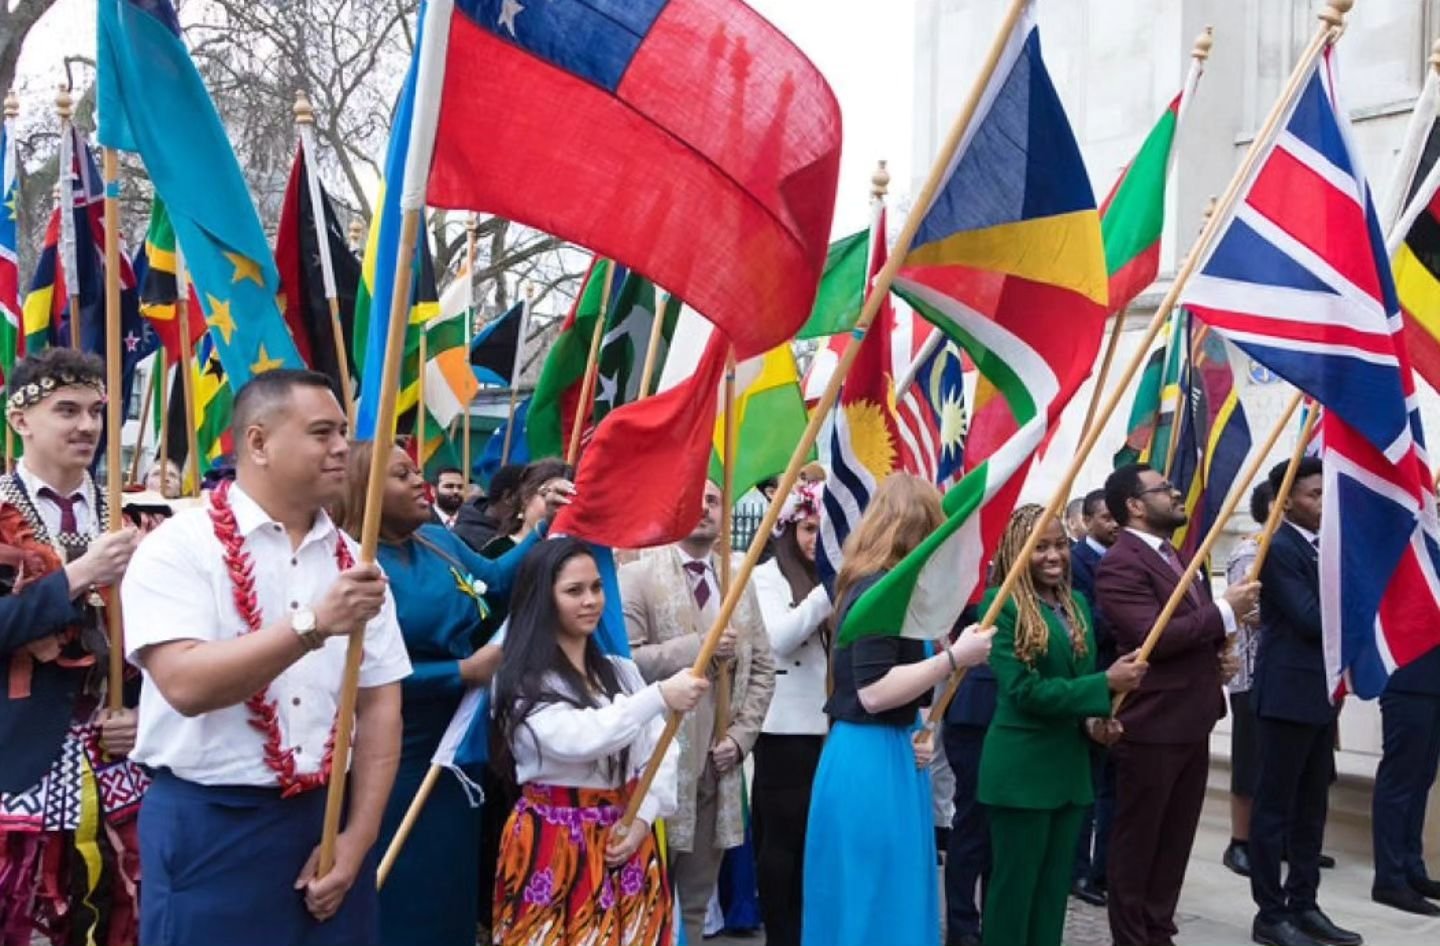 Today marks 75 years since the #Commonwealth was created and the London Declaration was signed. 

This unique community comprised of 54 member states stands as a shining example of how a diverse group of nations, made up of a rich variety of peoples,